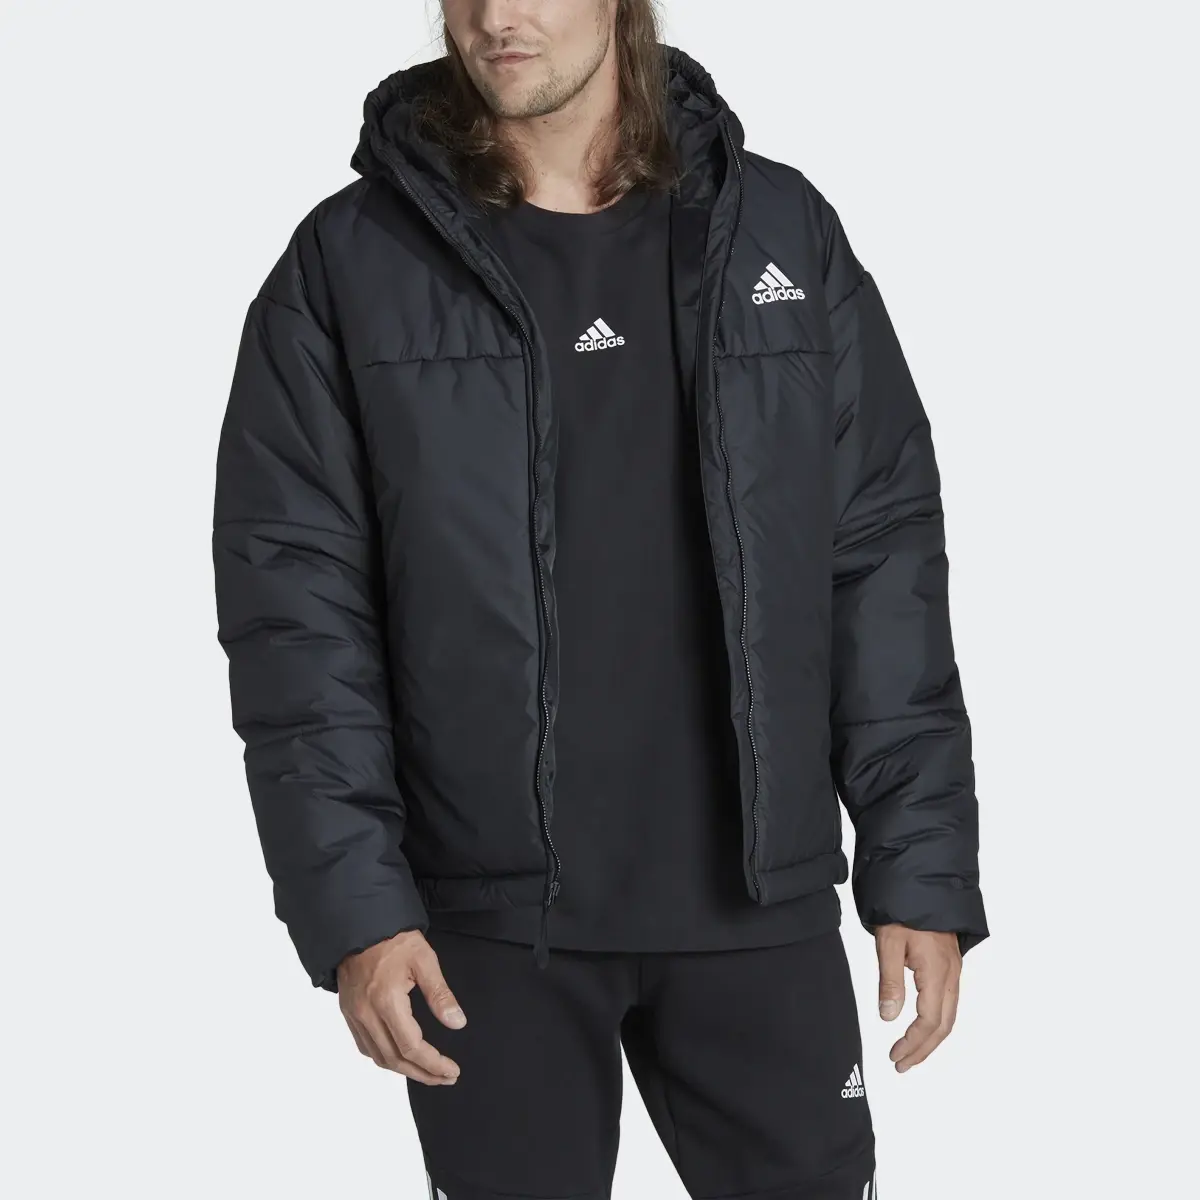 Adidas BSC 3-Stripes Puffy Hooded Jacket. 1